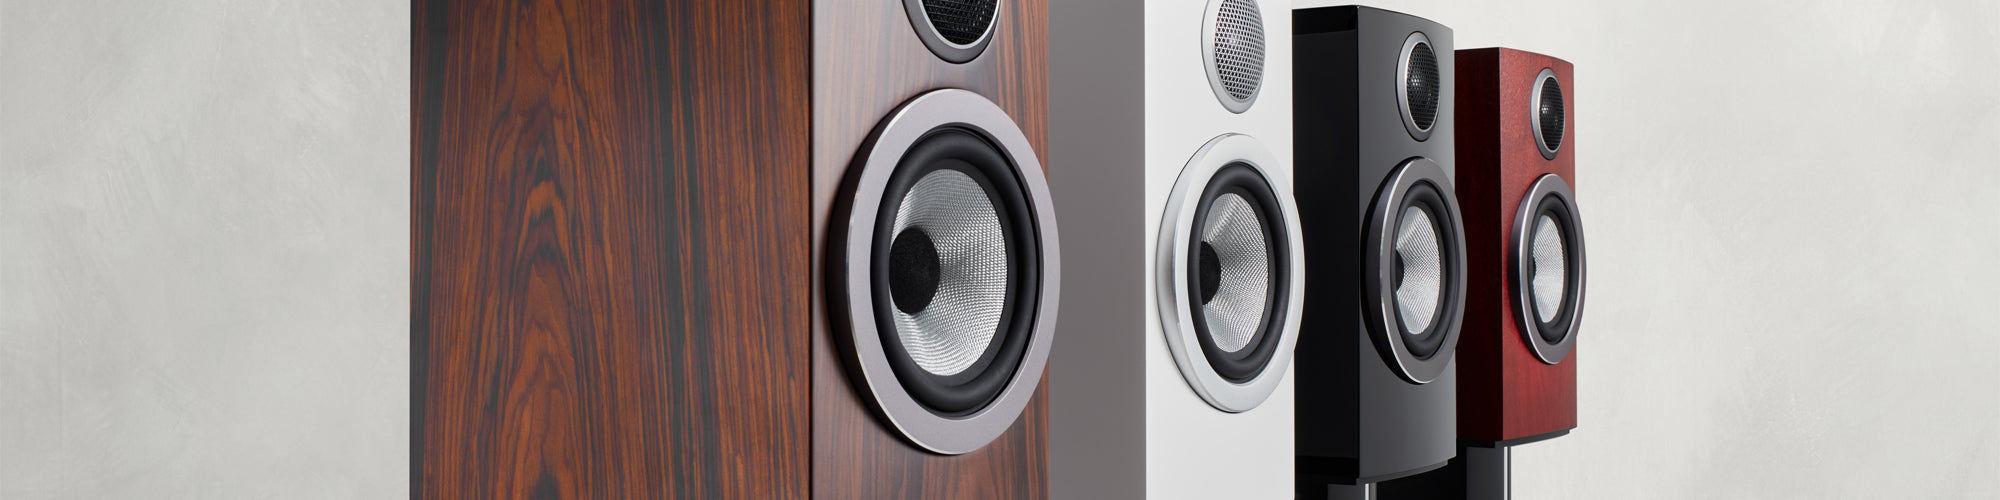 Bowers and Wilkins 700 Series